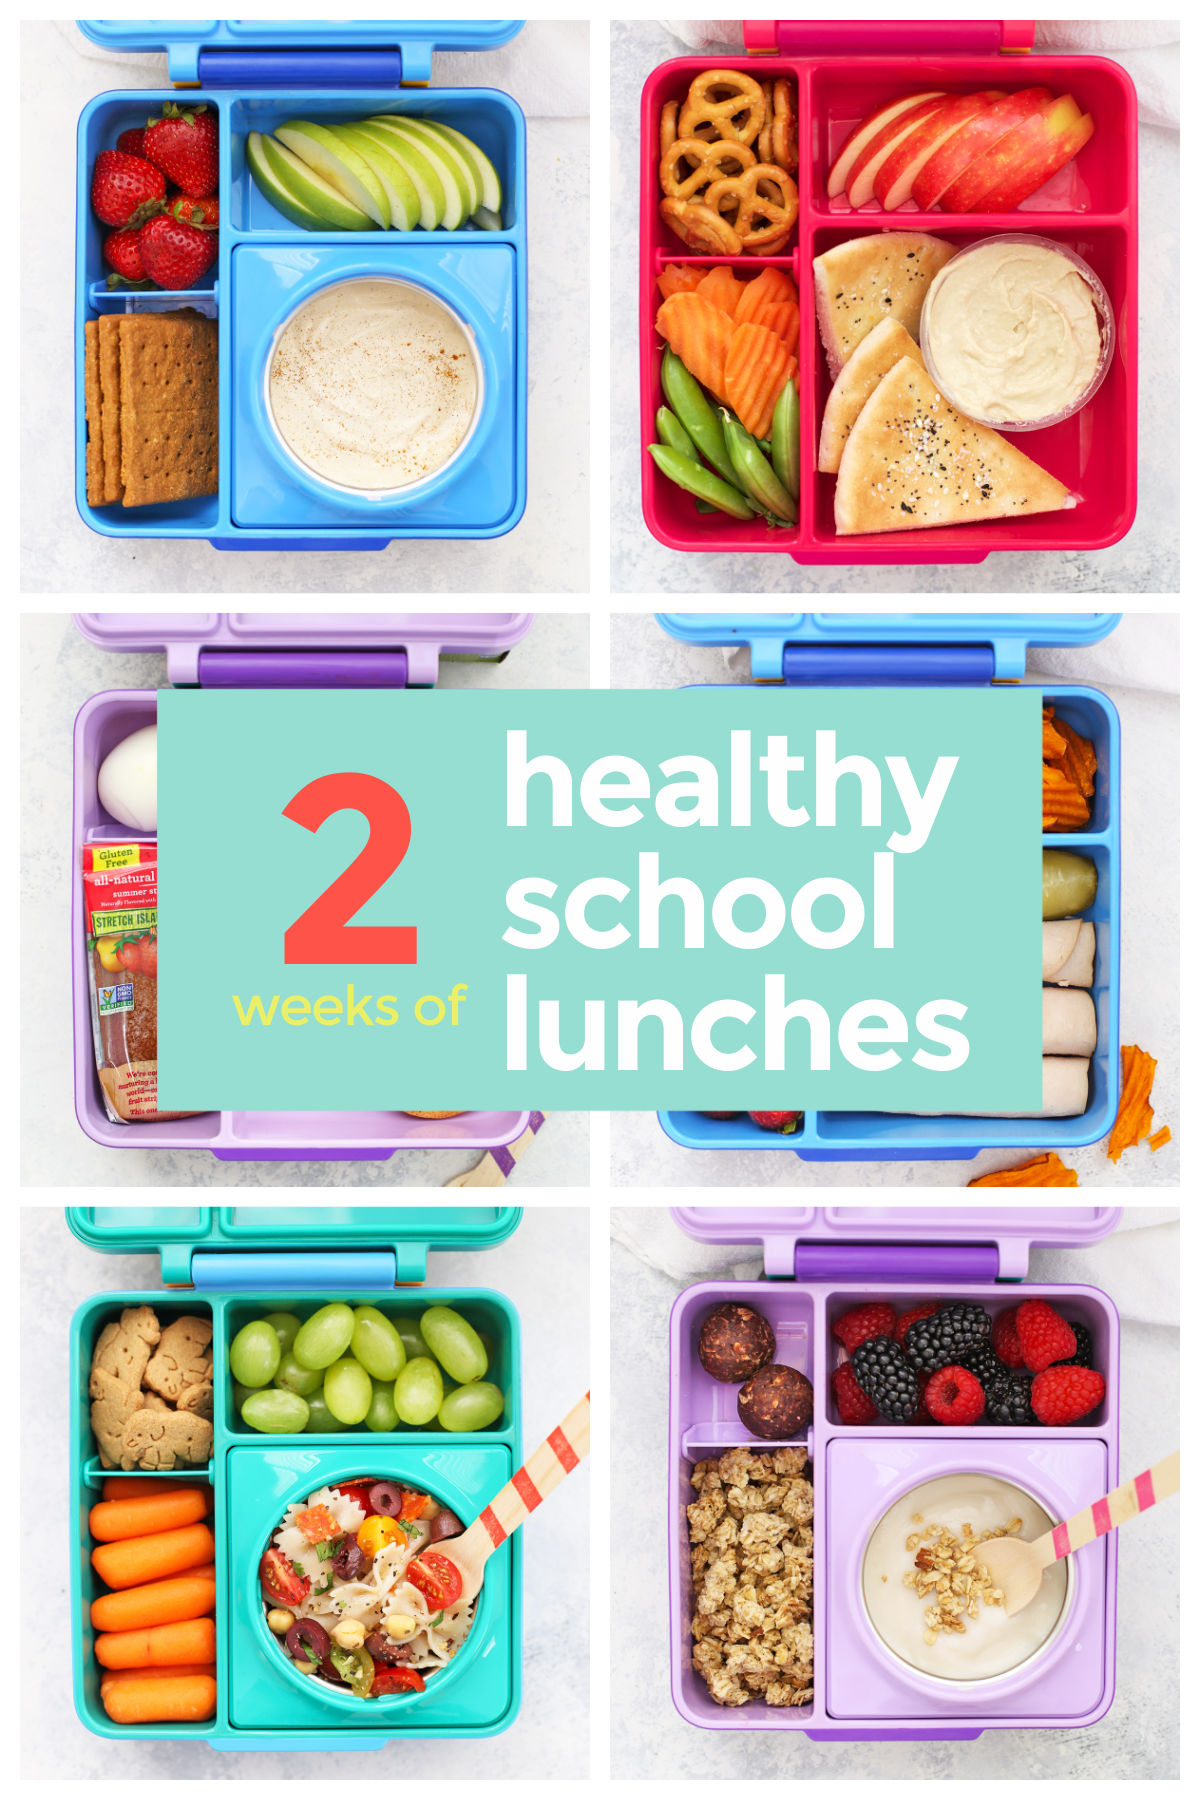 Get 2 Weeks of Healthy School Lunch Ideas in this post, plus a free printable packed lunch cheat sheet for creating your own combinations! // Gluten free school lunch ideas // paleo school lunch // paleo lunch for kids // vegan school lunch ideas // healthy school lunches // dairy free school lunch ideas // school lunch inspiration // kids bento box // kids bento lunch // toddler lunch // omie box #schoollunch #packedlunch #healthylunch